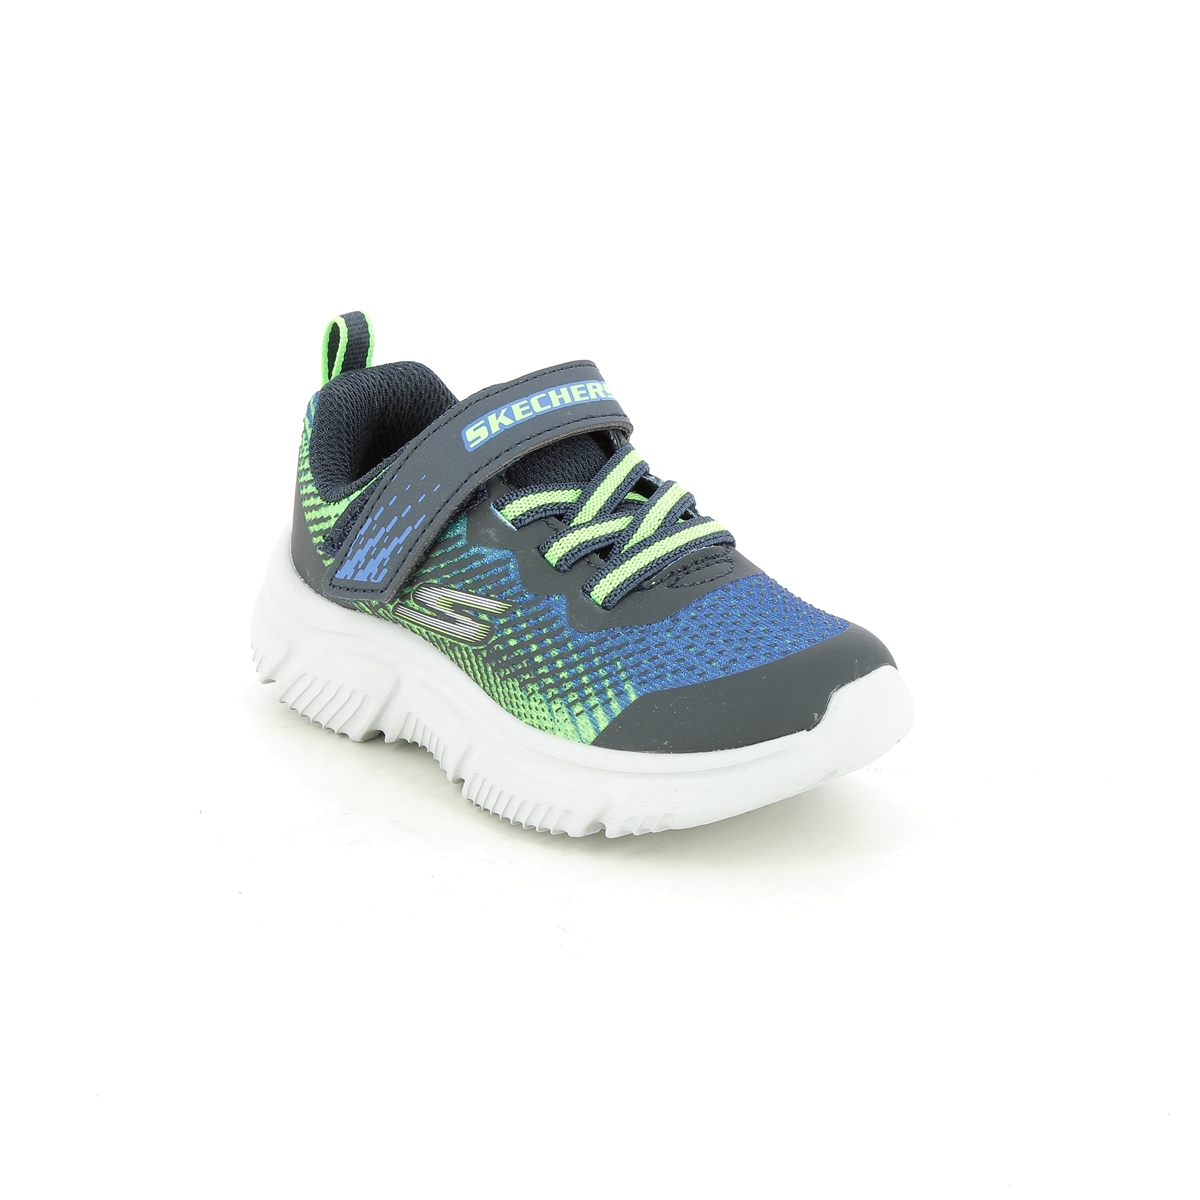 Skechers Go Run 650 Inf NVLM Navy Lime Kids trainers 405035N in a Plain Man-made in Size 22